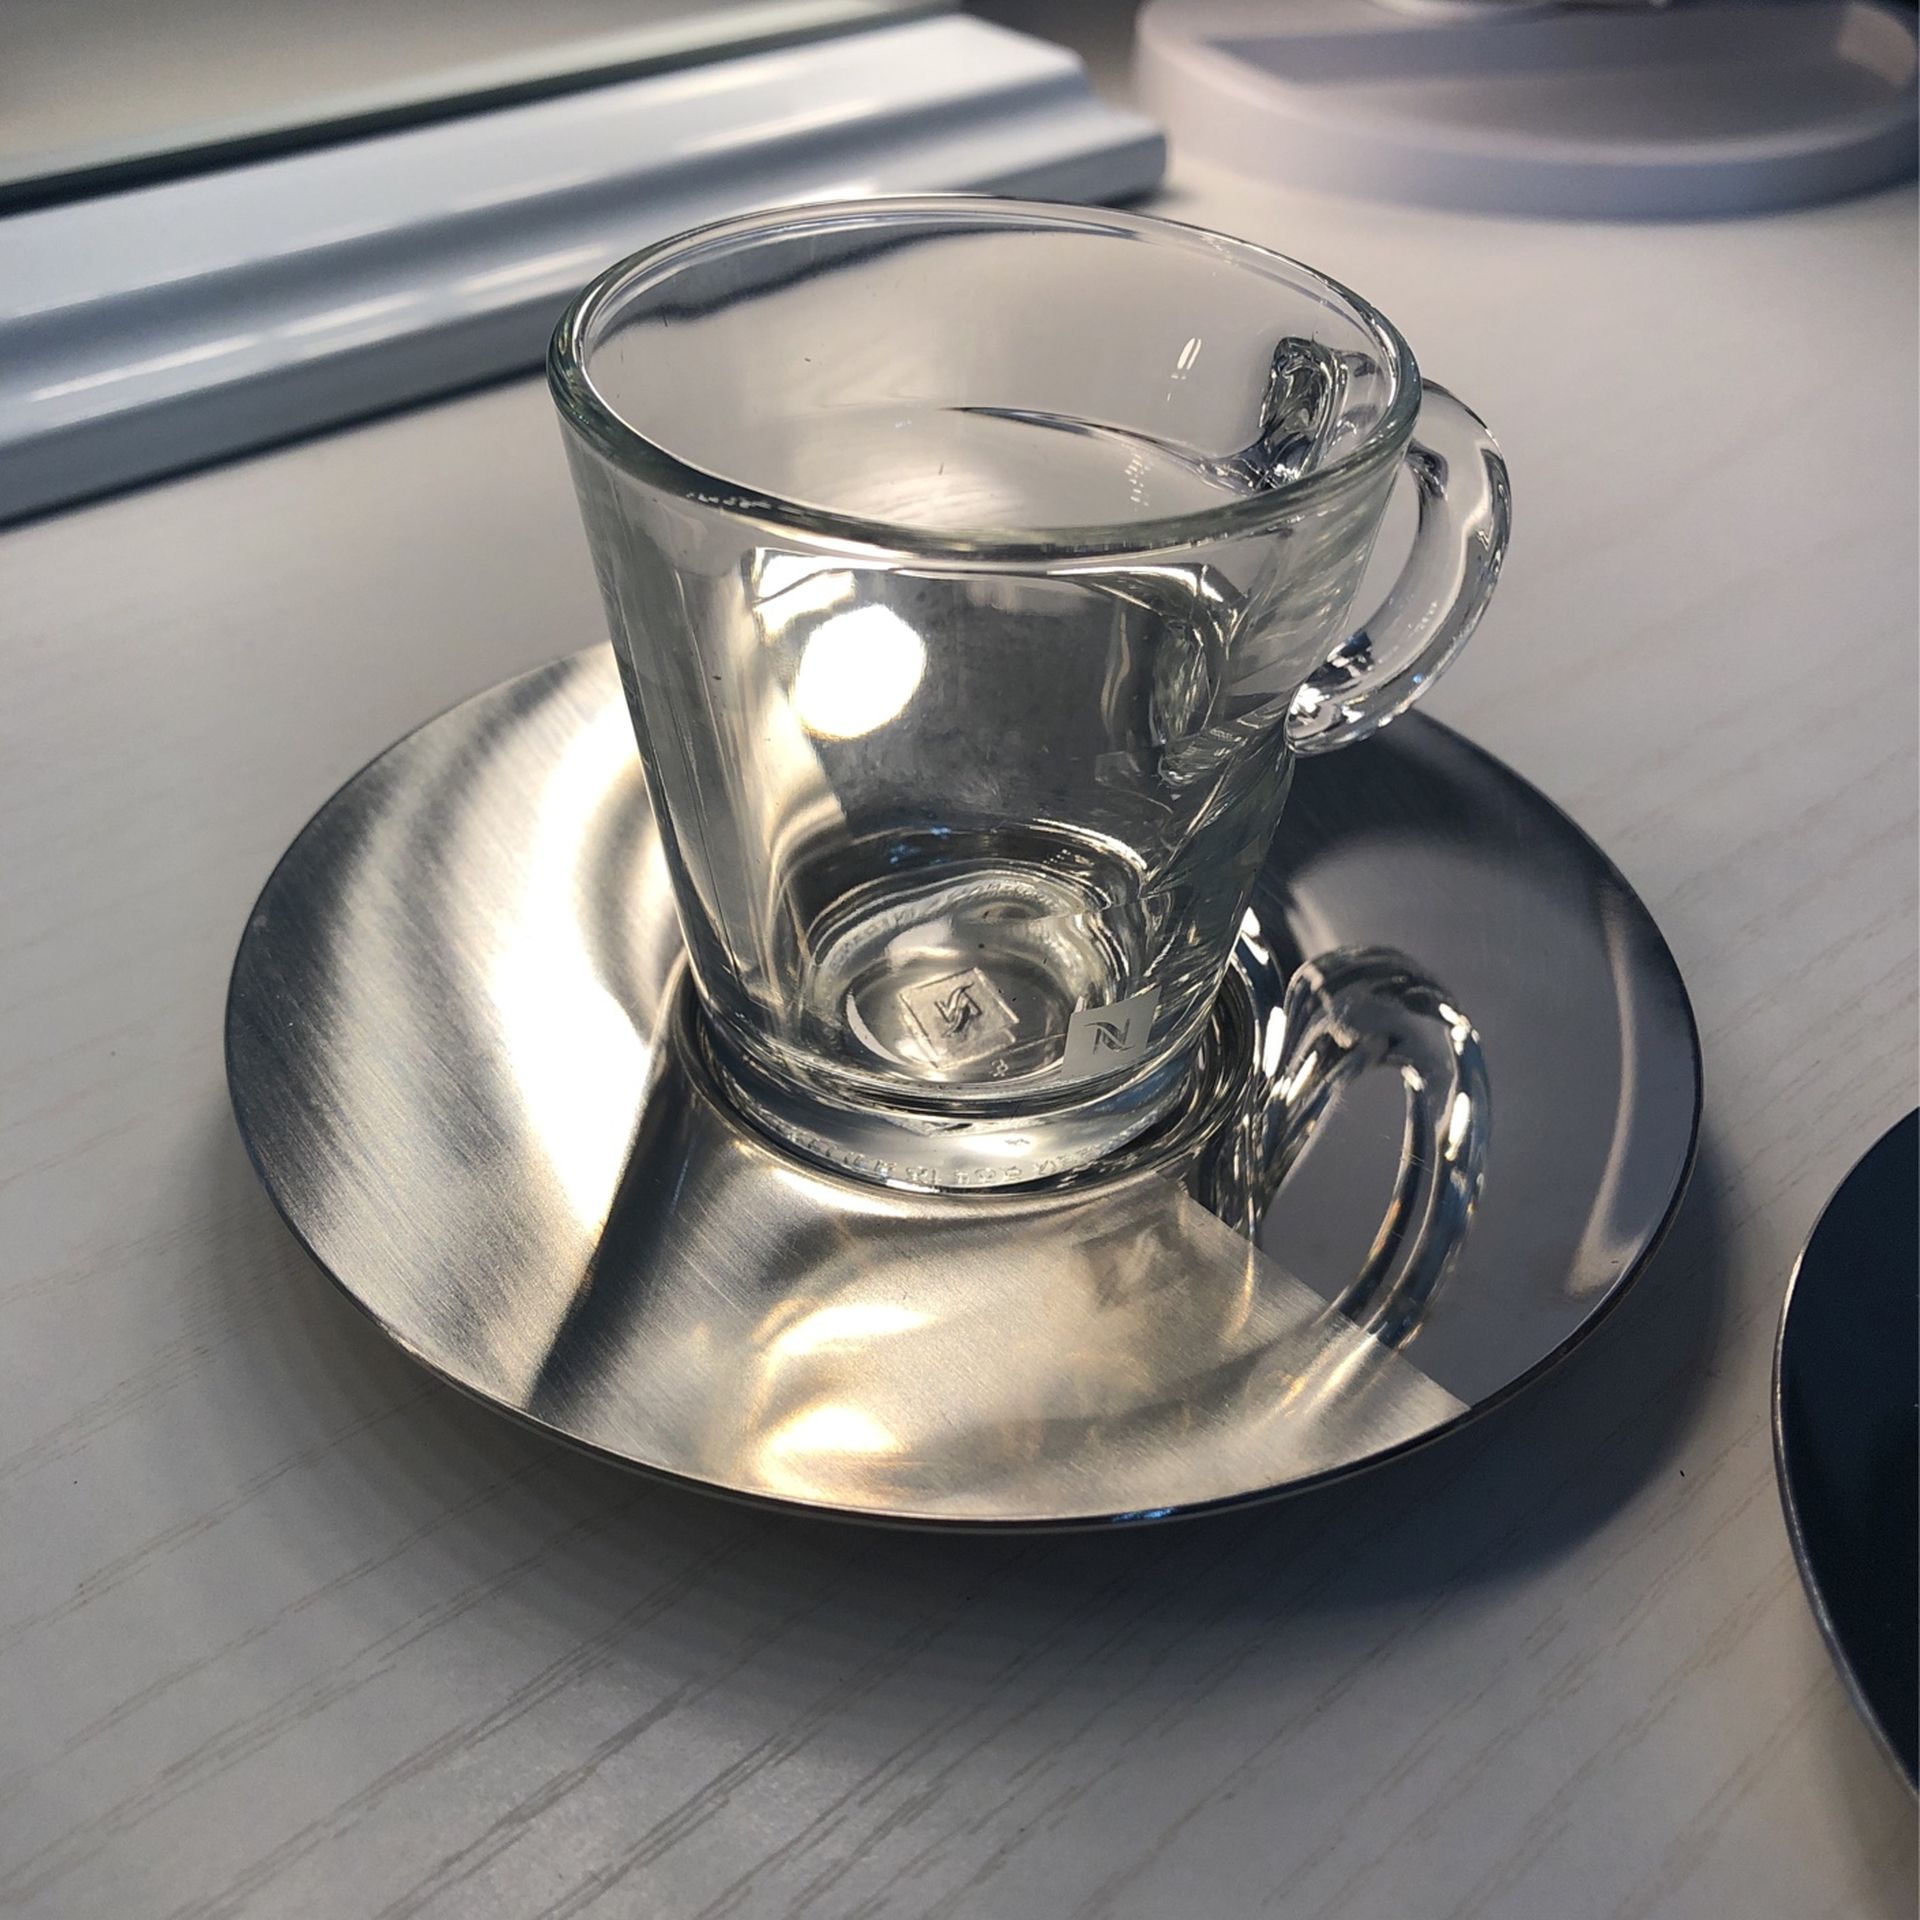 Nespresso Glass Cups With Saucers - Drinkware - Guisborough, Facebook  Marketplace